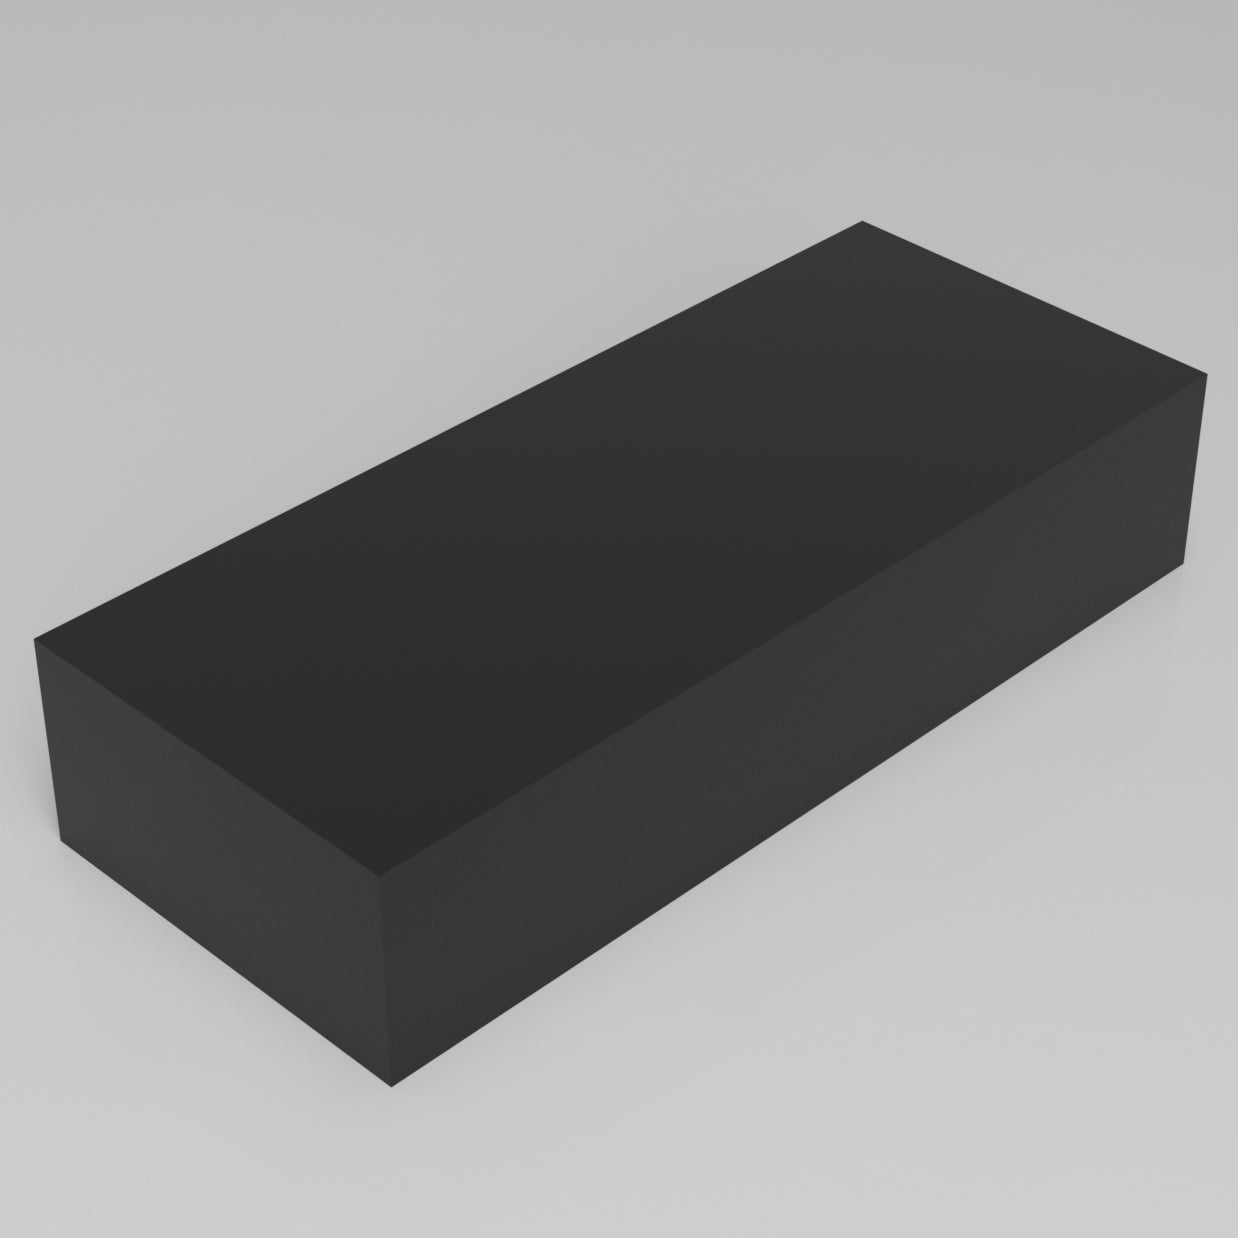 Machinable Wax Rectangular Block Front View 5 Inch by 10 Inch by 24 Inch